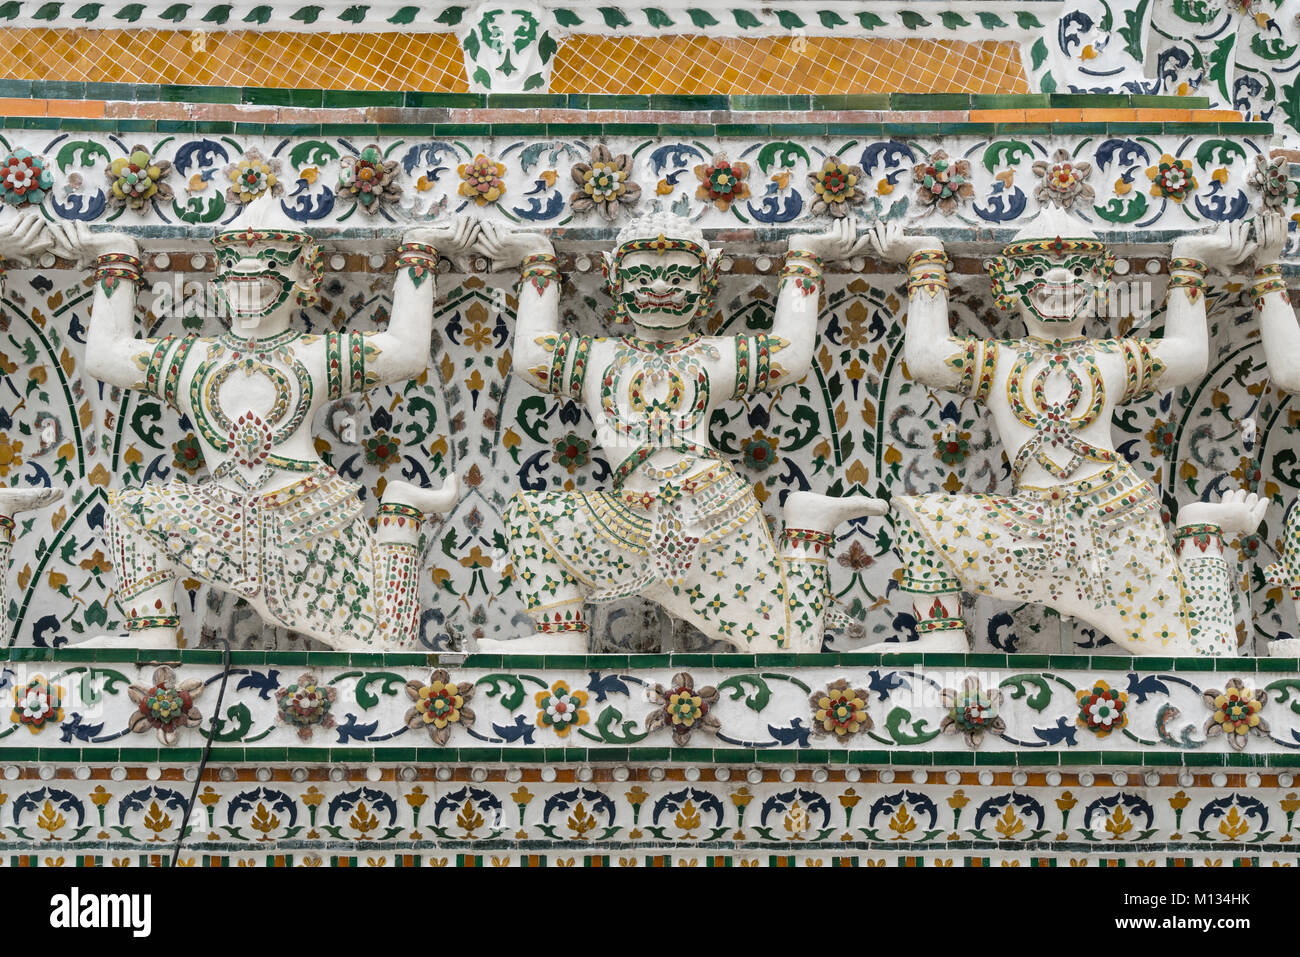 A detail of external decorations of Wat Arun temple in Bangkok, Thailand Stock Photo